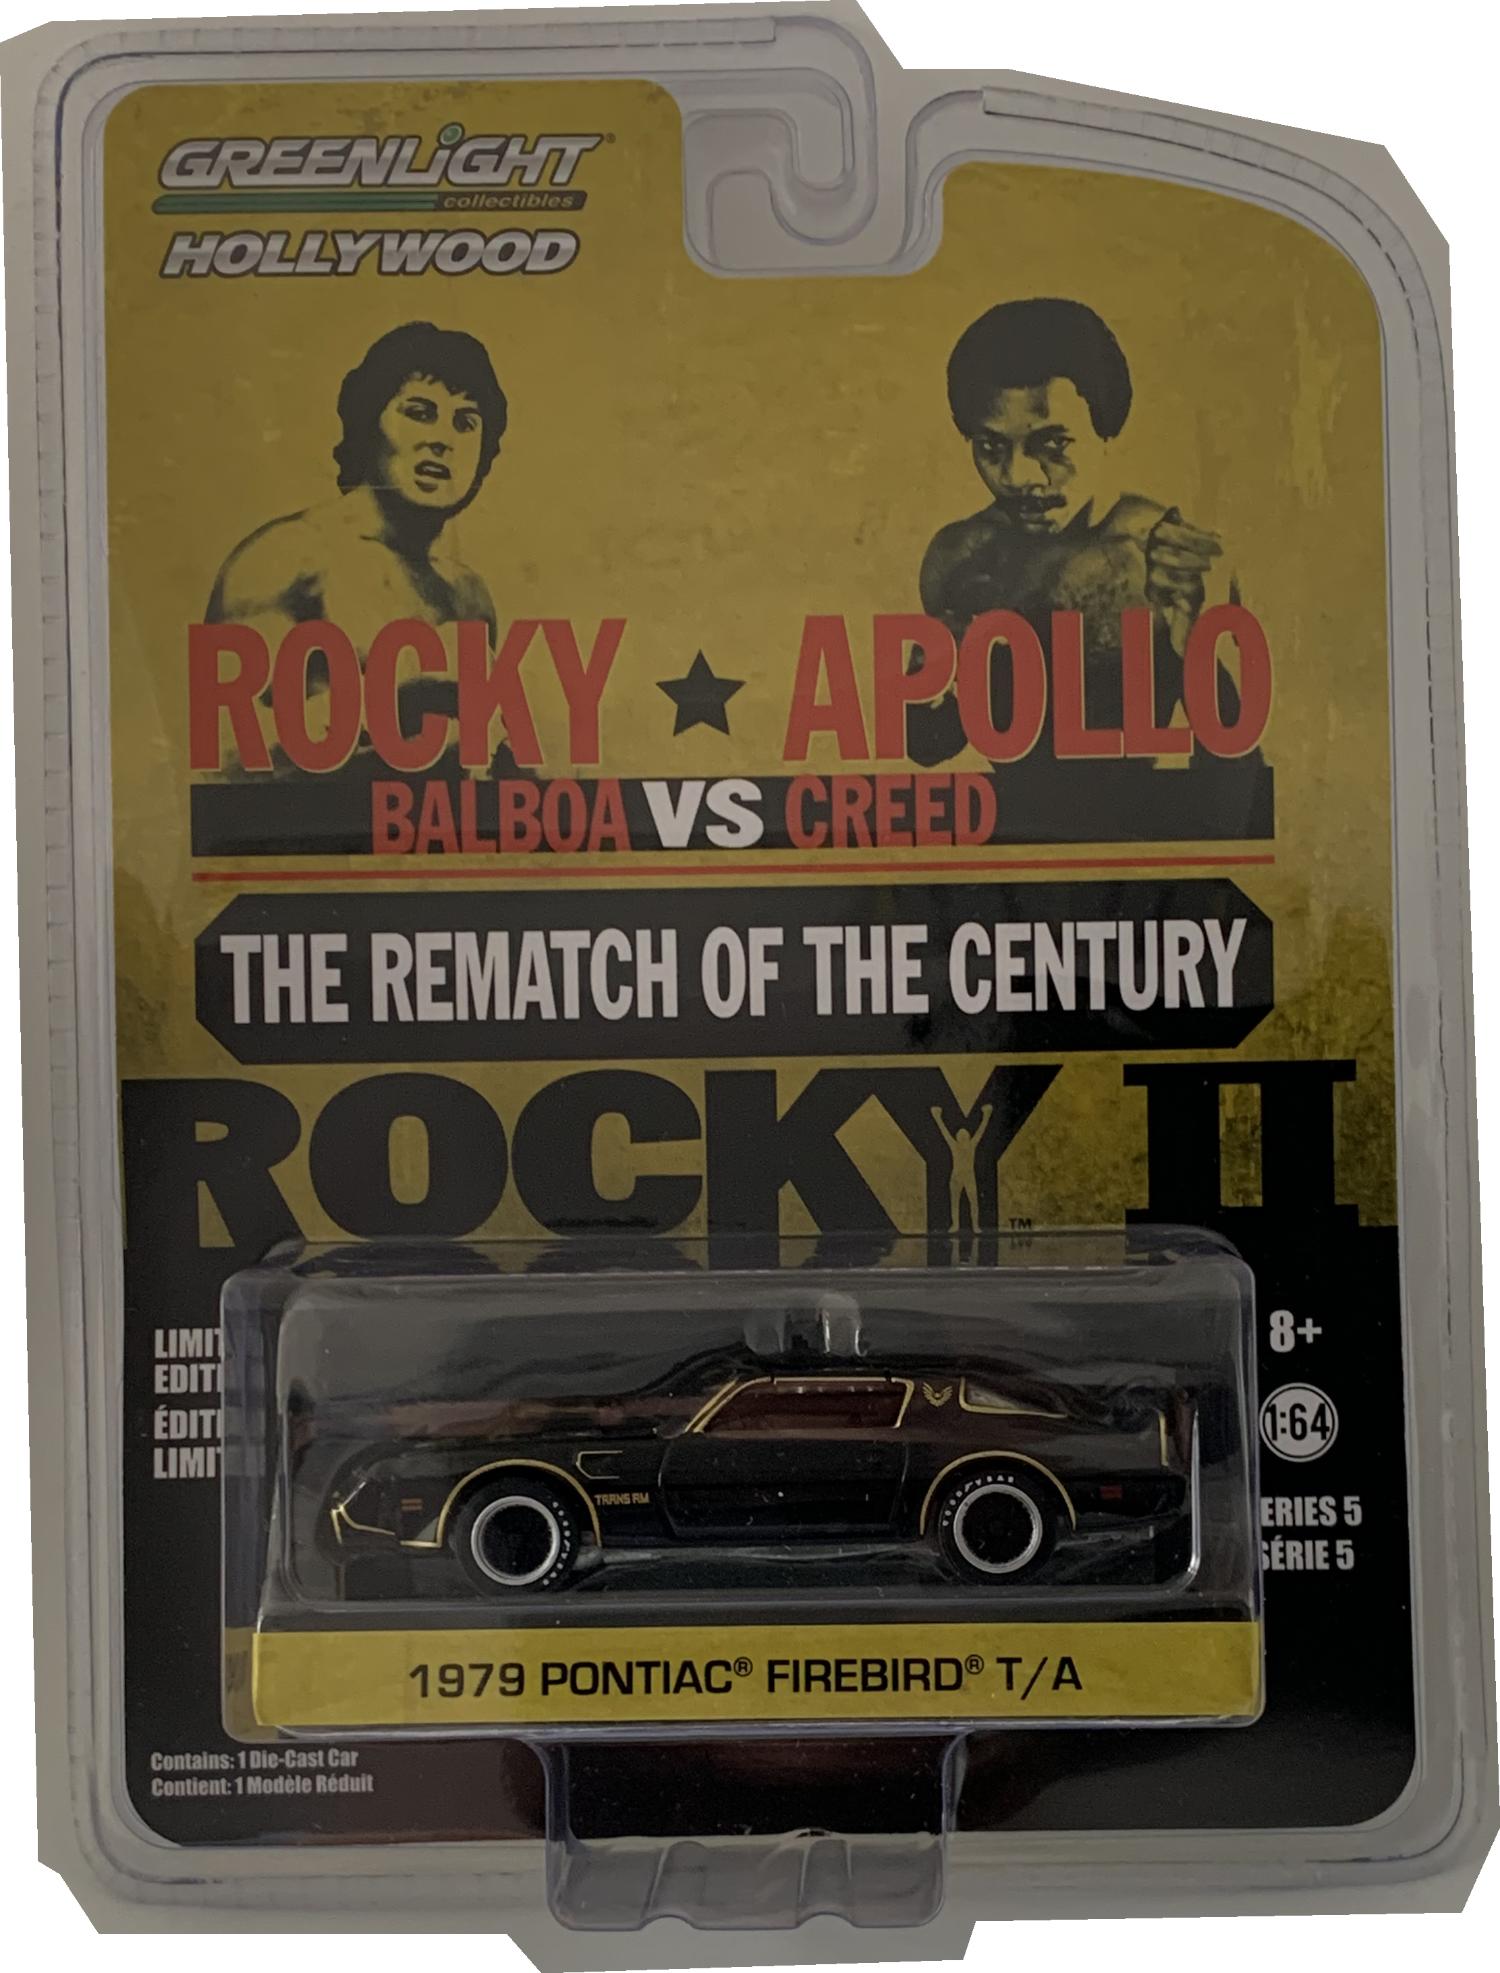 From  The Film Rocky 2, 1979 Pontiac Firebird T/A in black 1:64 scale model from Greenlight, limited edition model